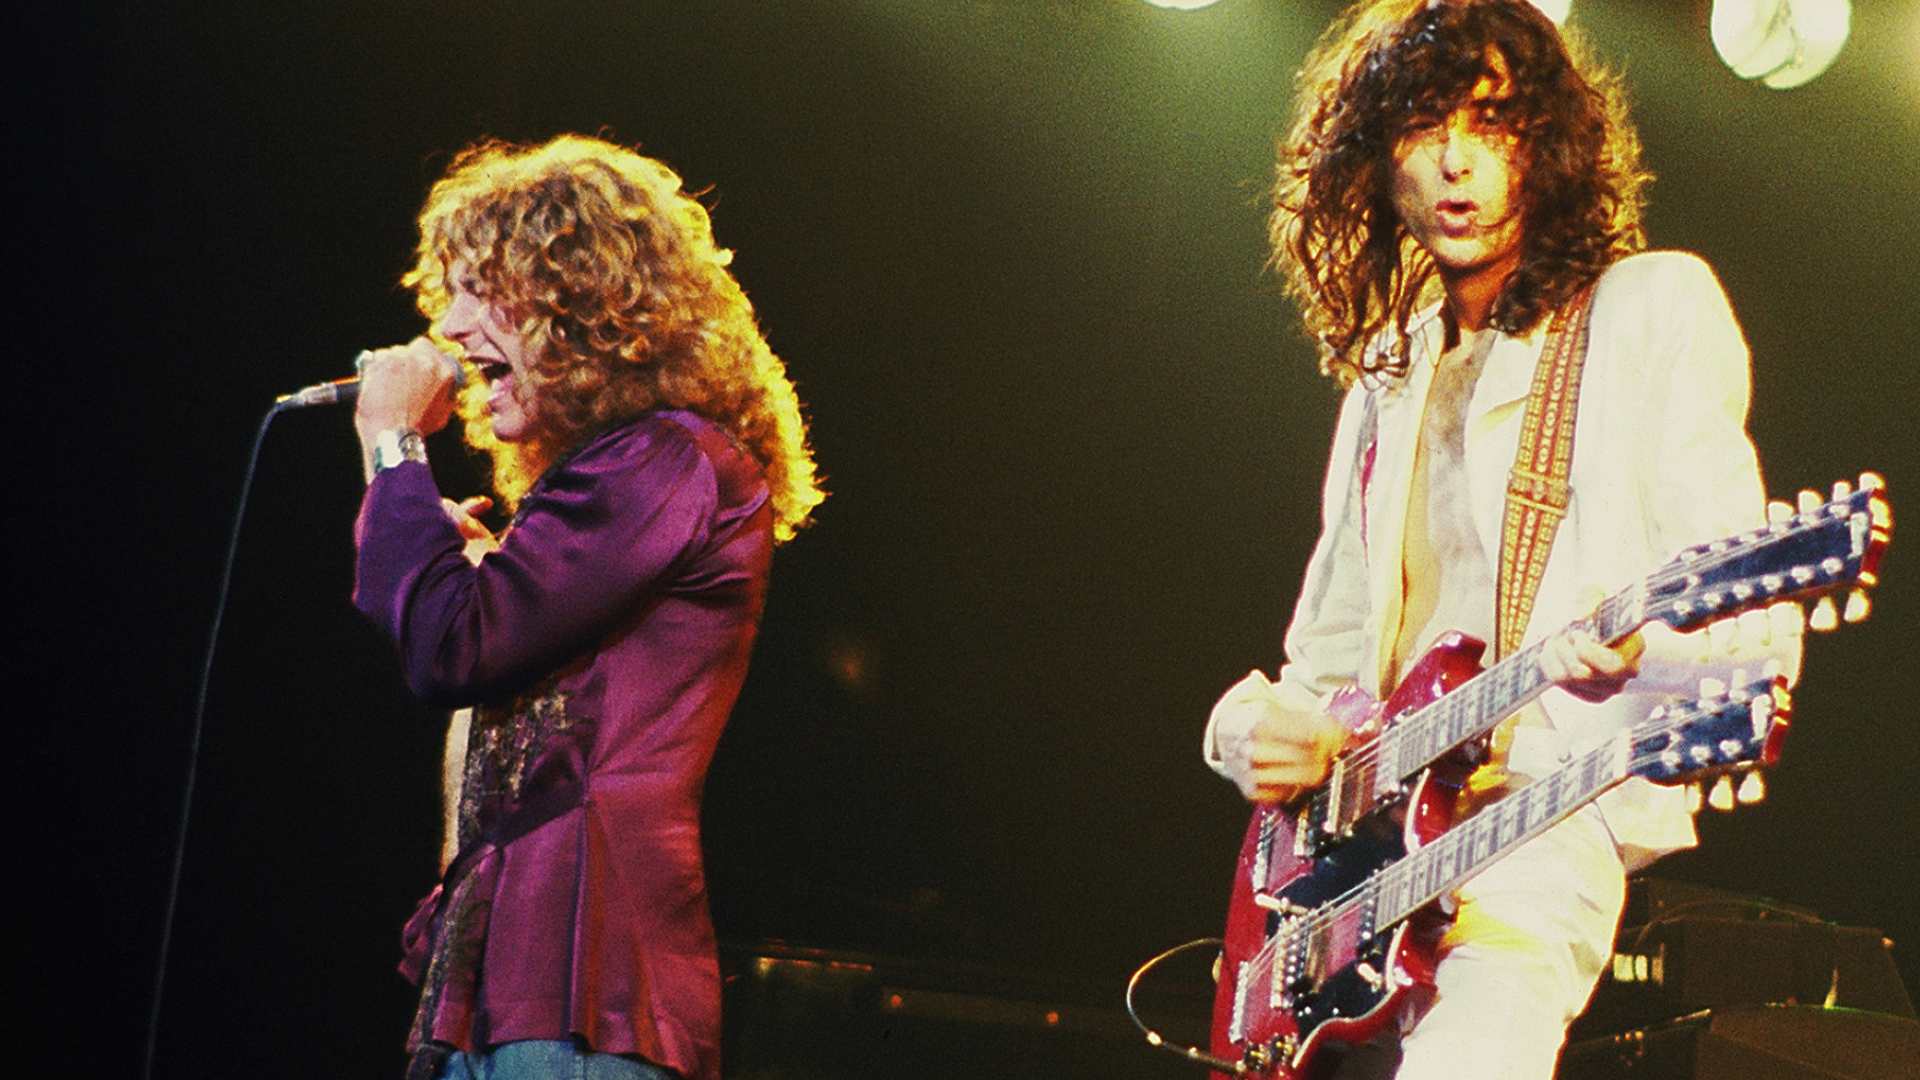 Led Zeppelin Wallpaper, hard rock classic groups bands jimmy page